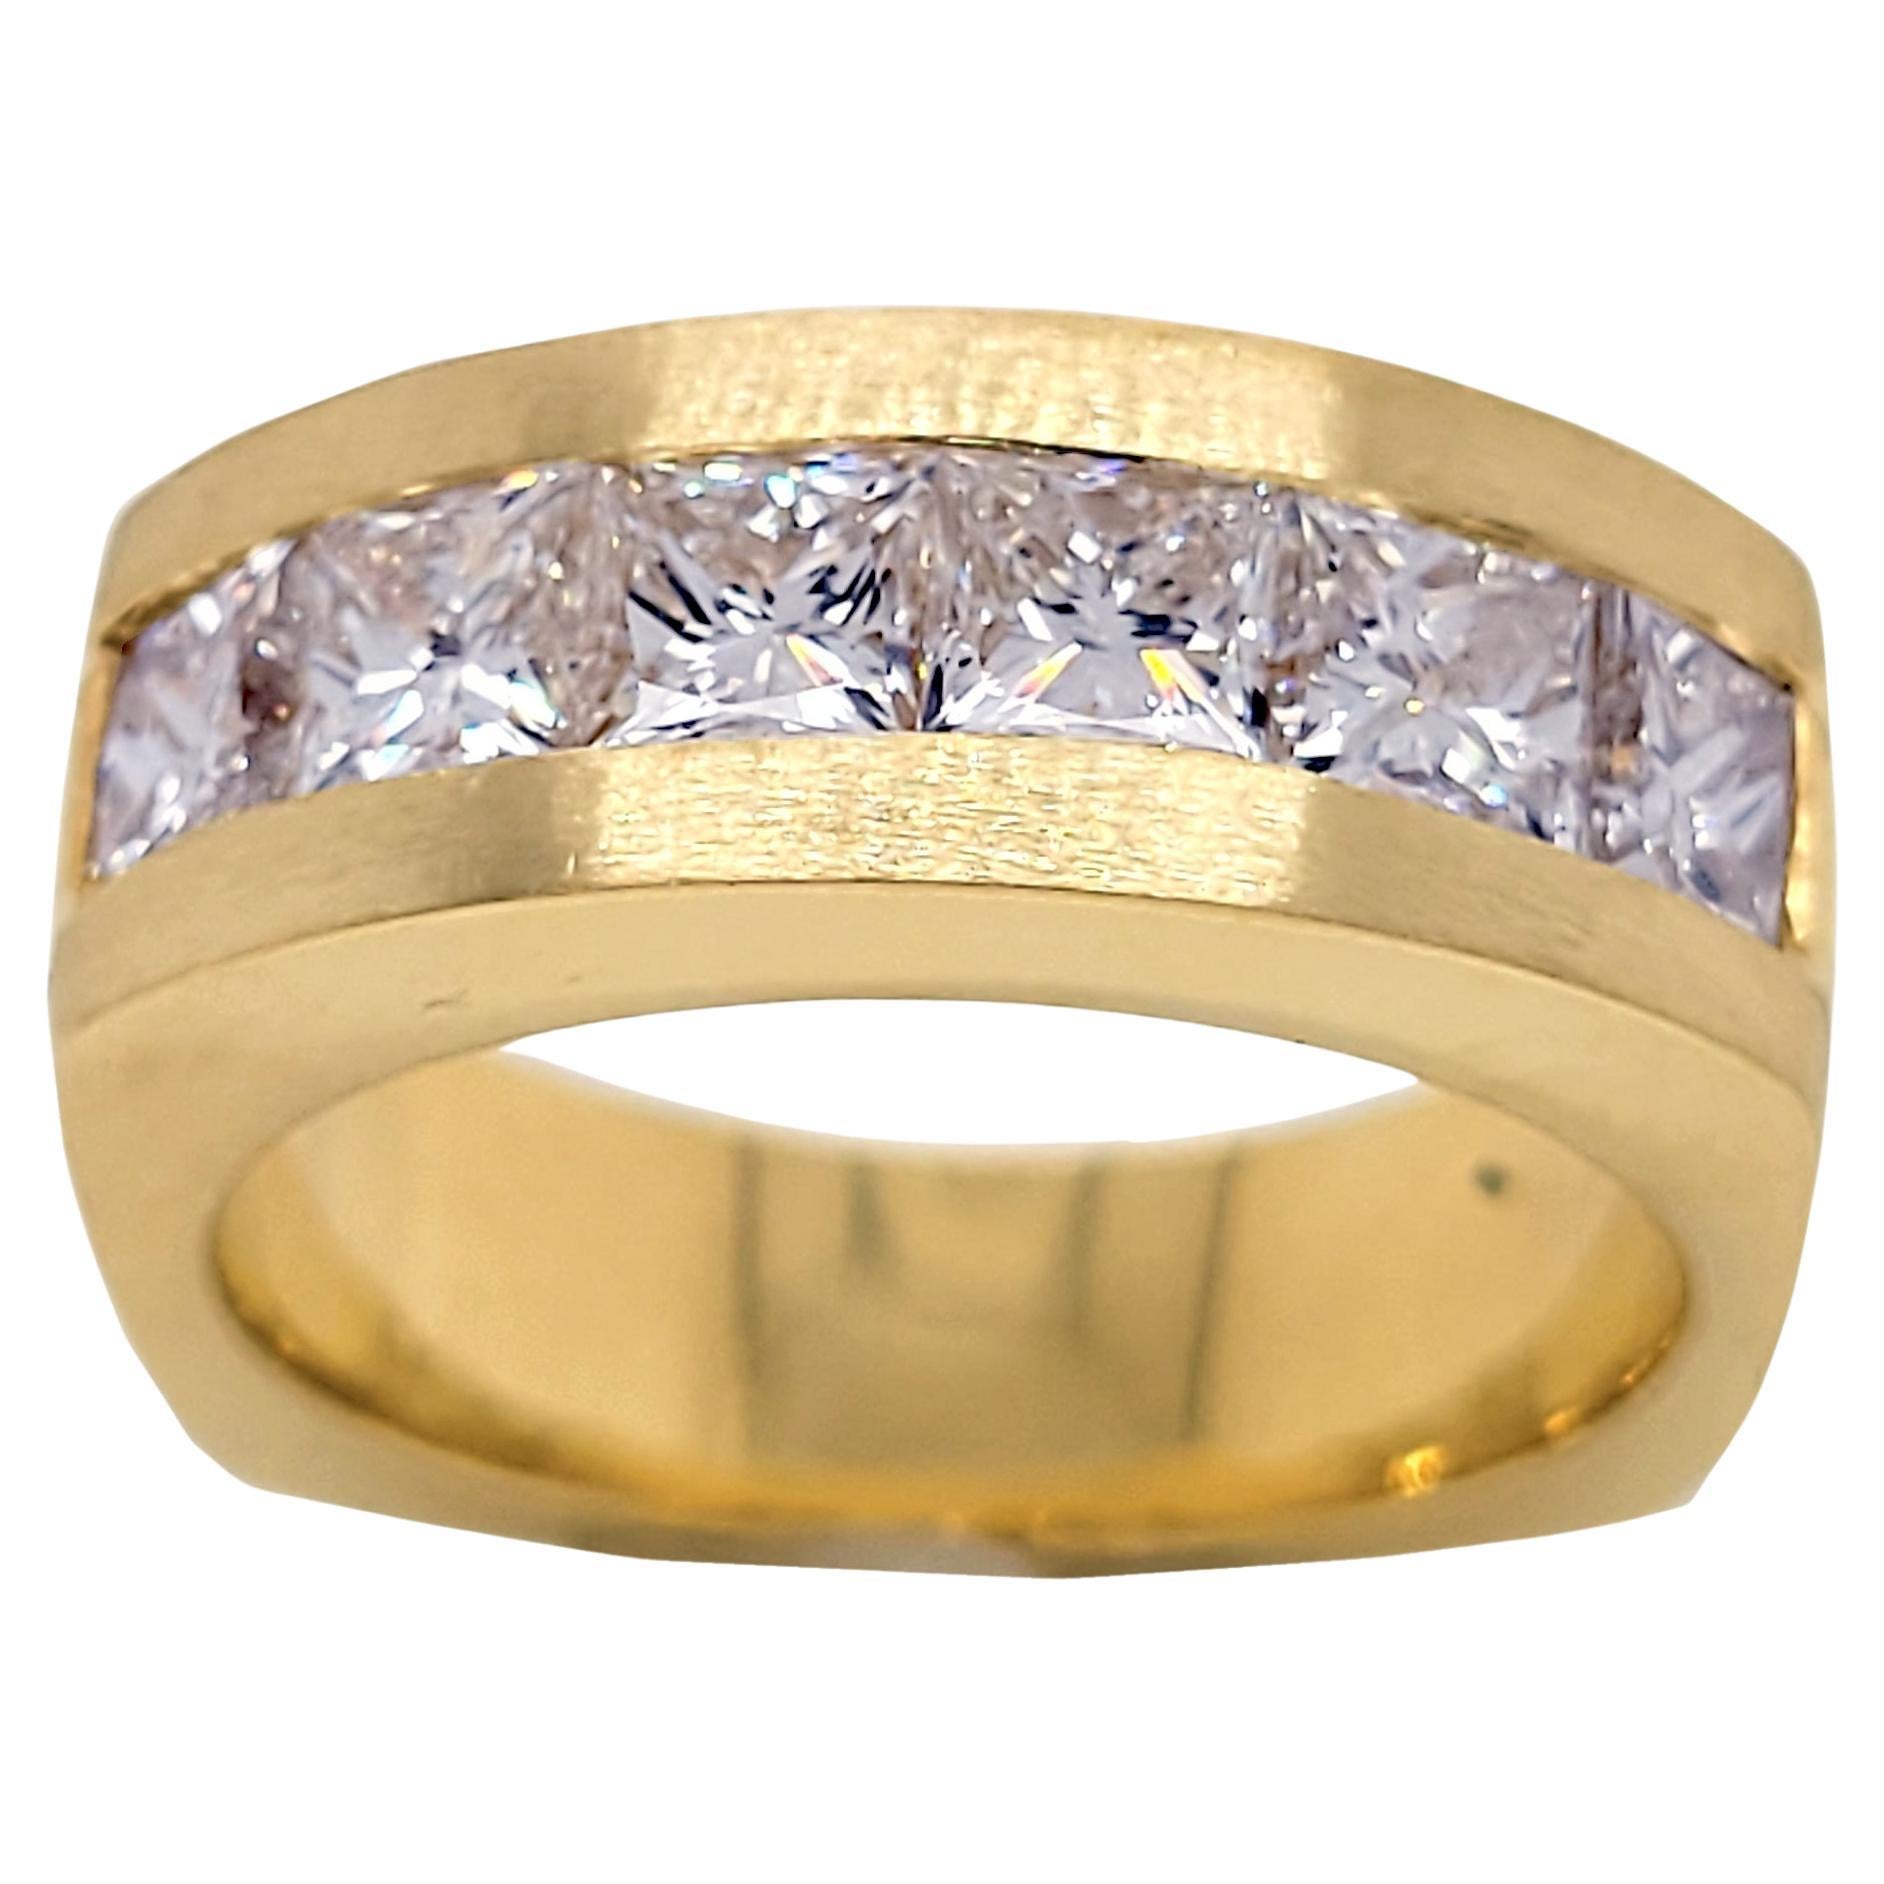 This Beautiful Gent's ring is made in 18K Yellow gold with shiny middle and matted sides. It has 6 pieces of perfectly matched princess cut diamonds (Total Weight 3.14 Ct - over 1/2 Ct each) channel set on the top. The ring is square shaped shank.